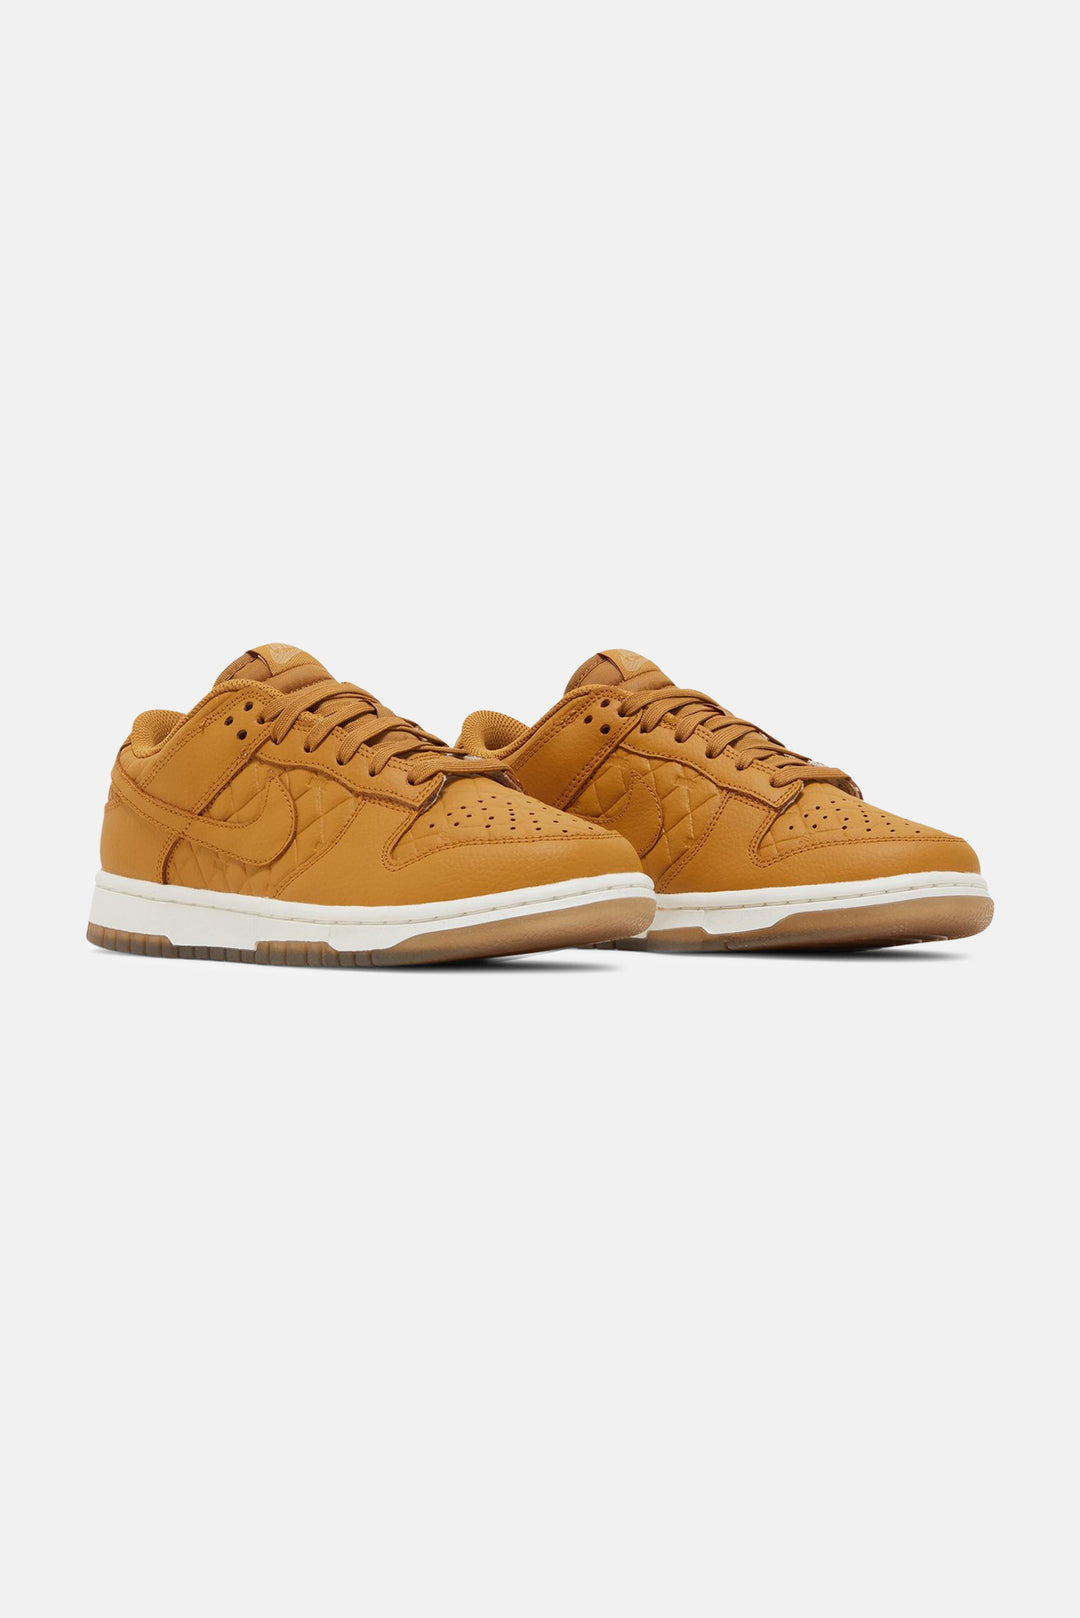 Women's Dunk Low Quilted Wheat